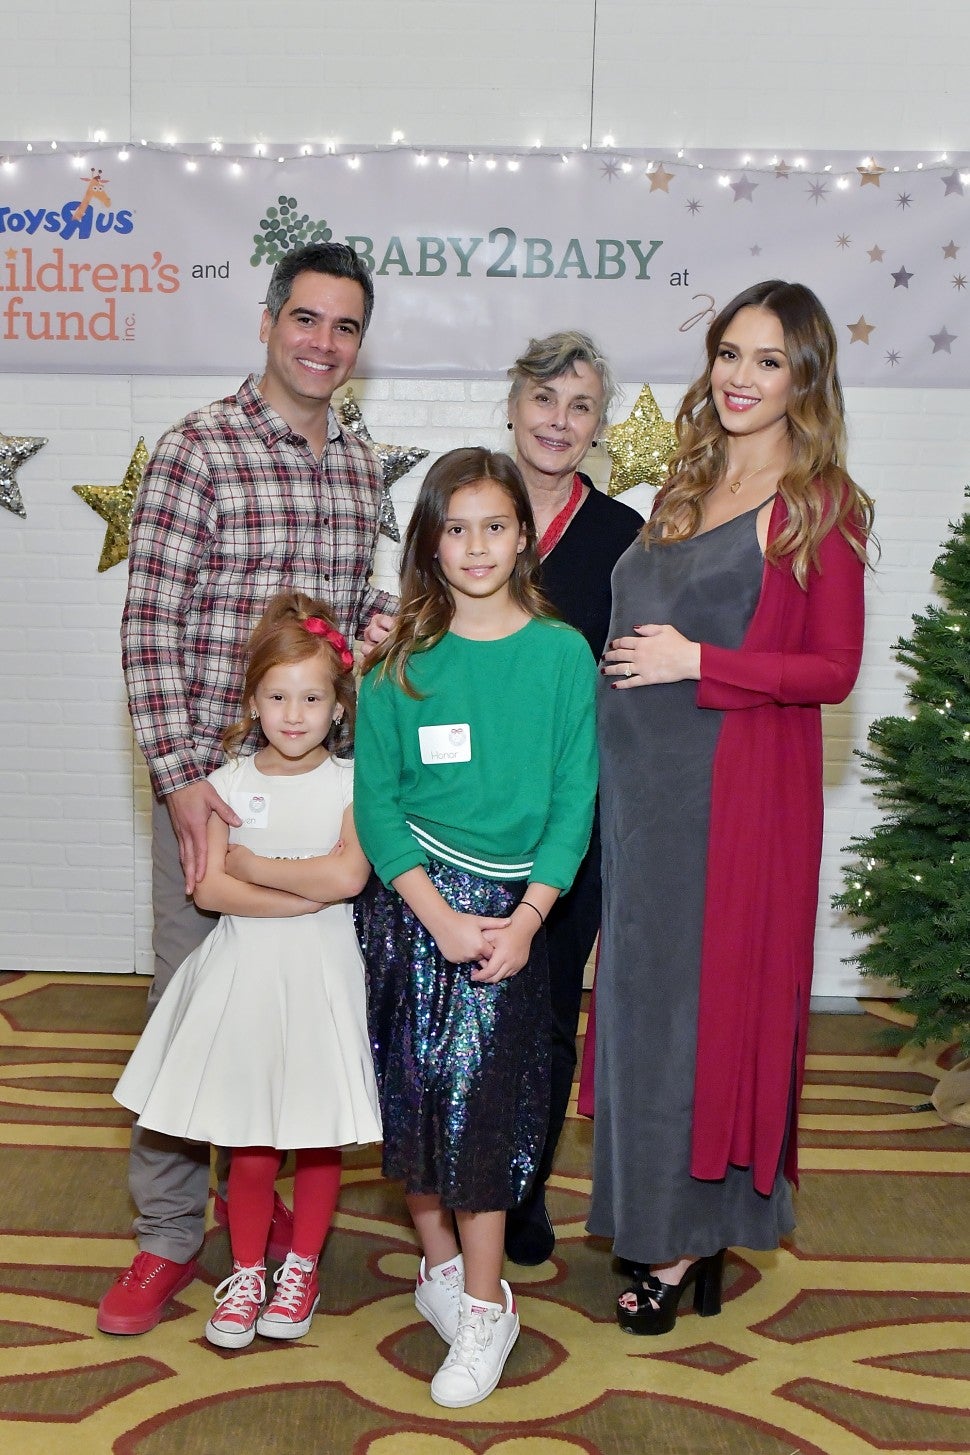 Jessica Alba, Cash Warren and daughters at baby2baby event